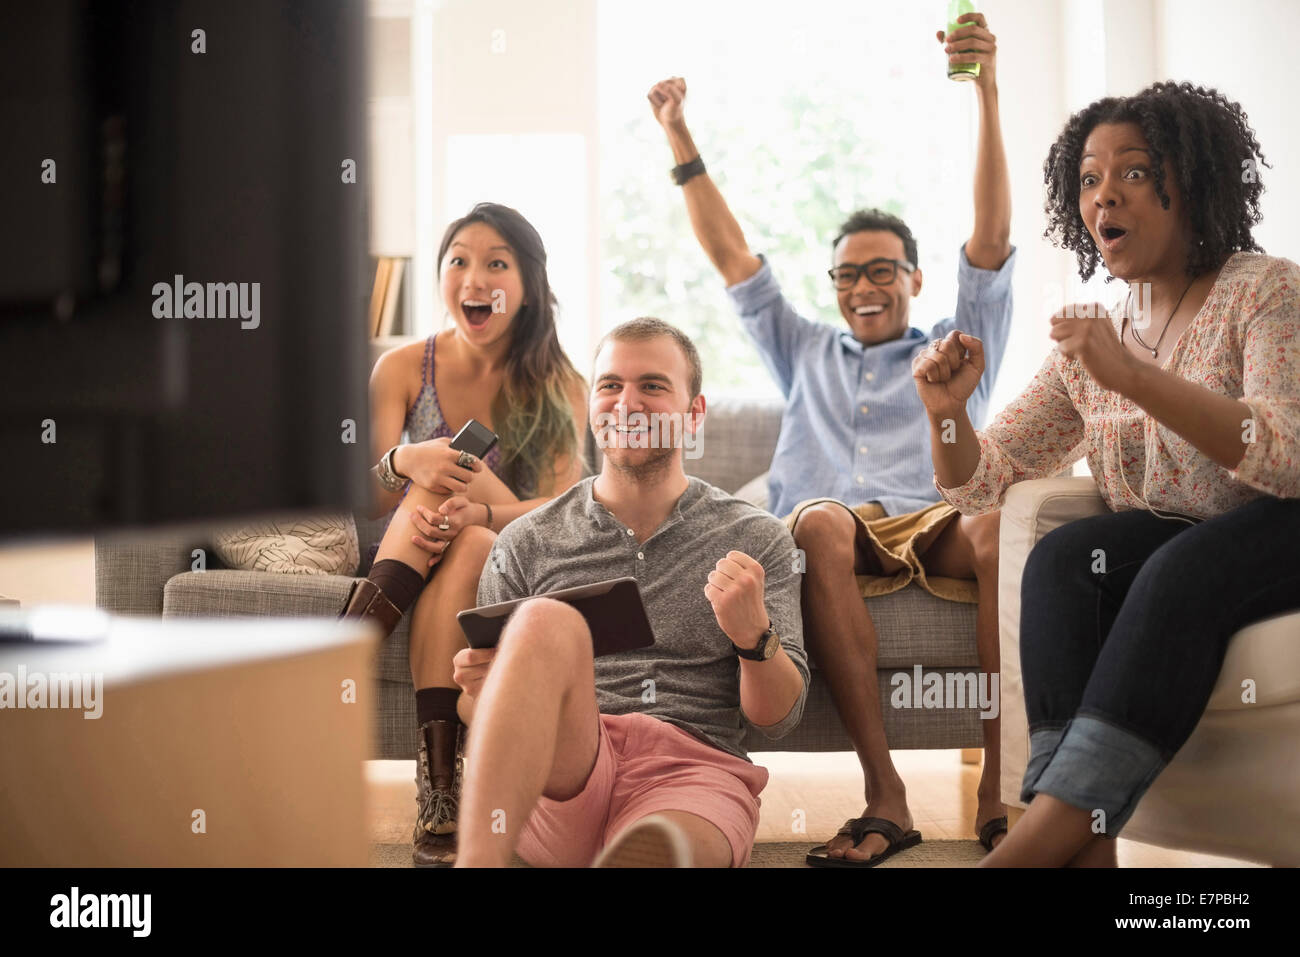 Group of friends watching television Stock Photo